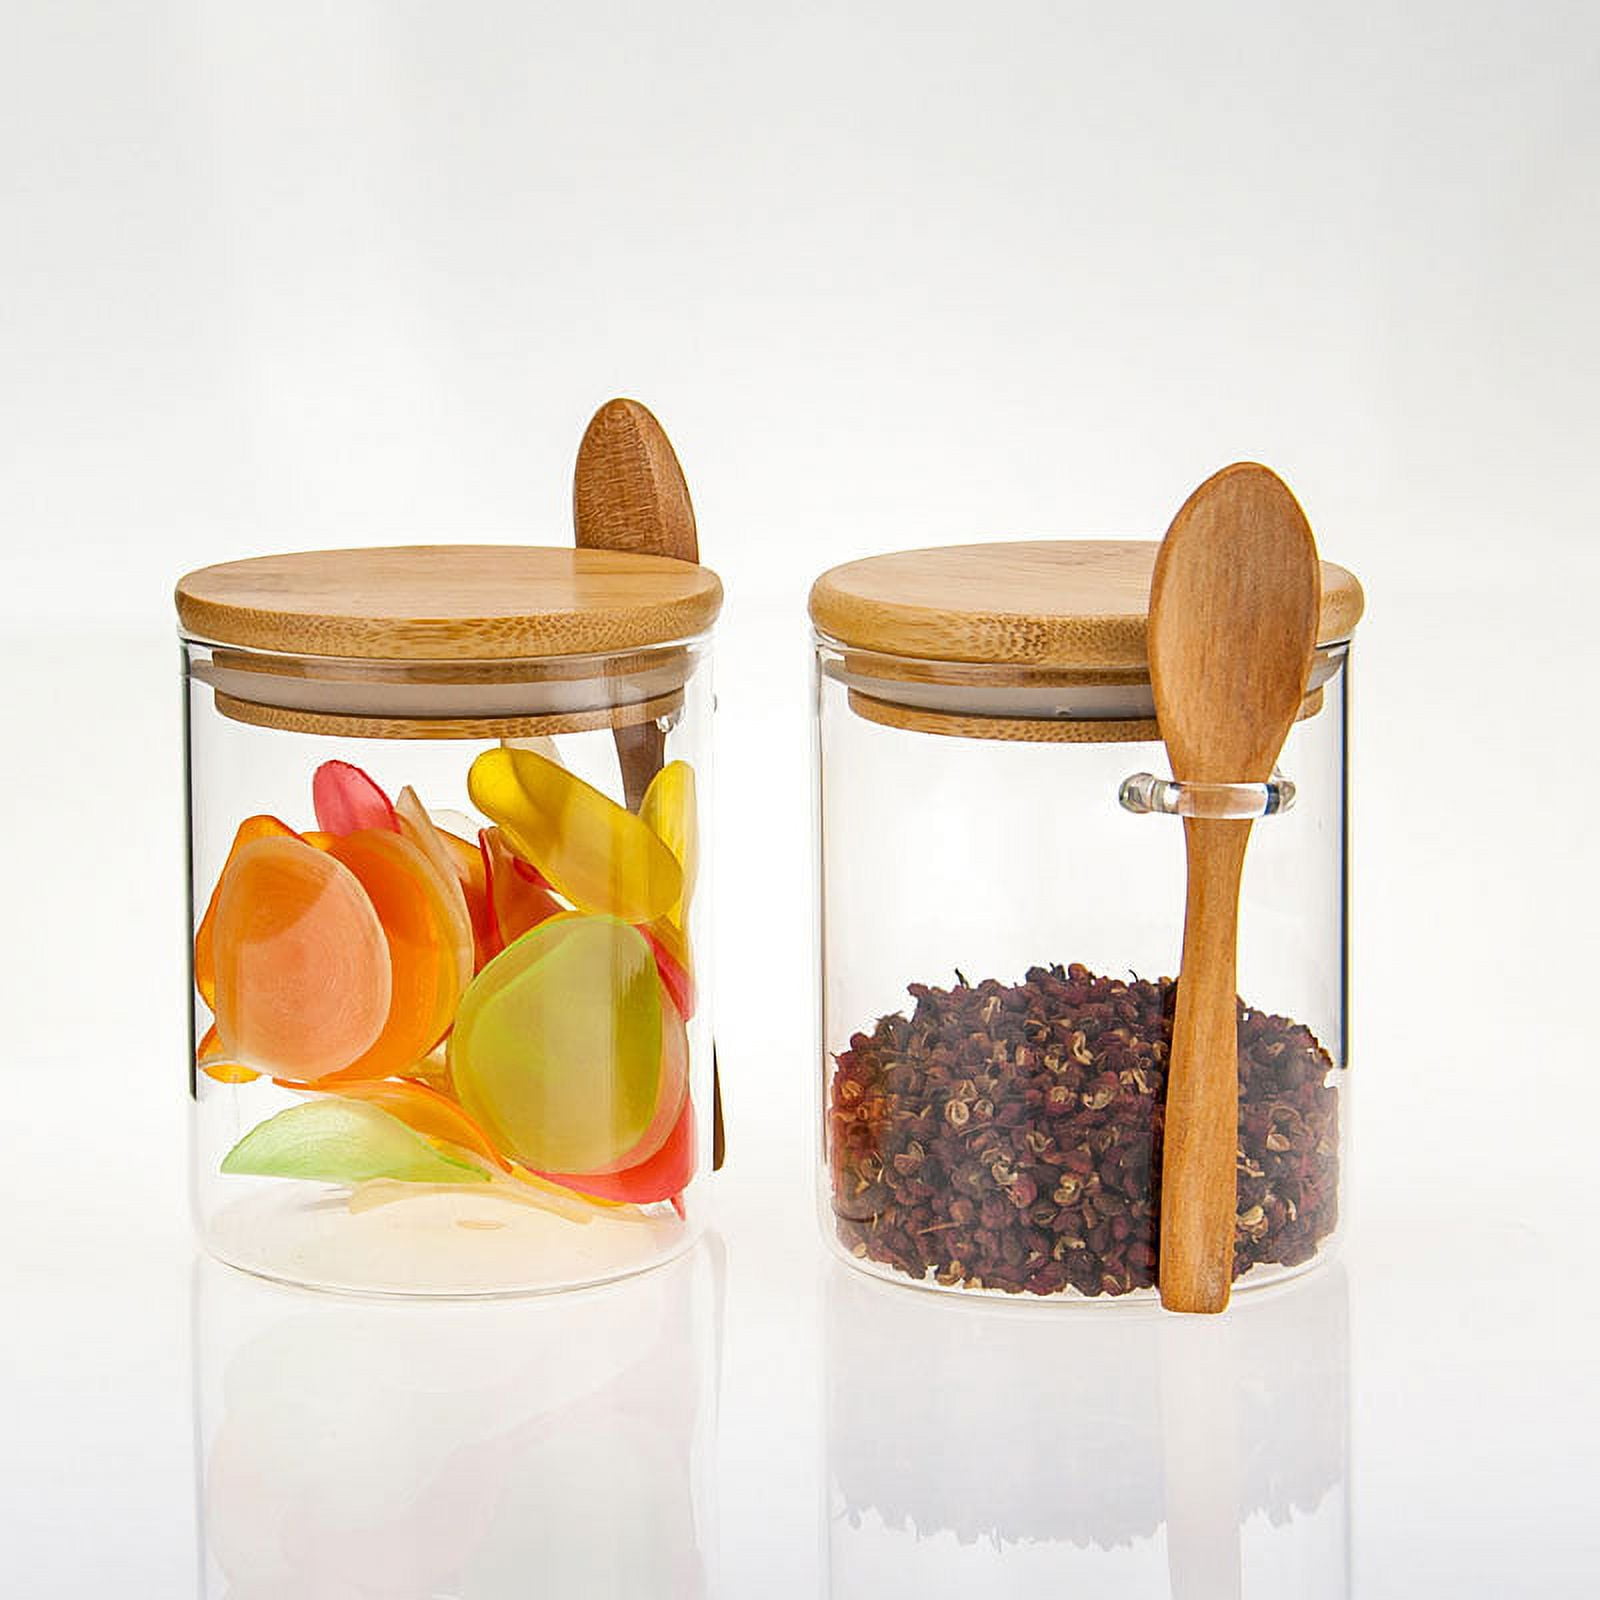 Set of 3 Airtight Glass Jars with Bamboo Lids & Bamboo Spoons -  Decorative & Dur